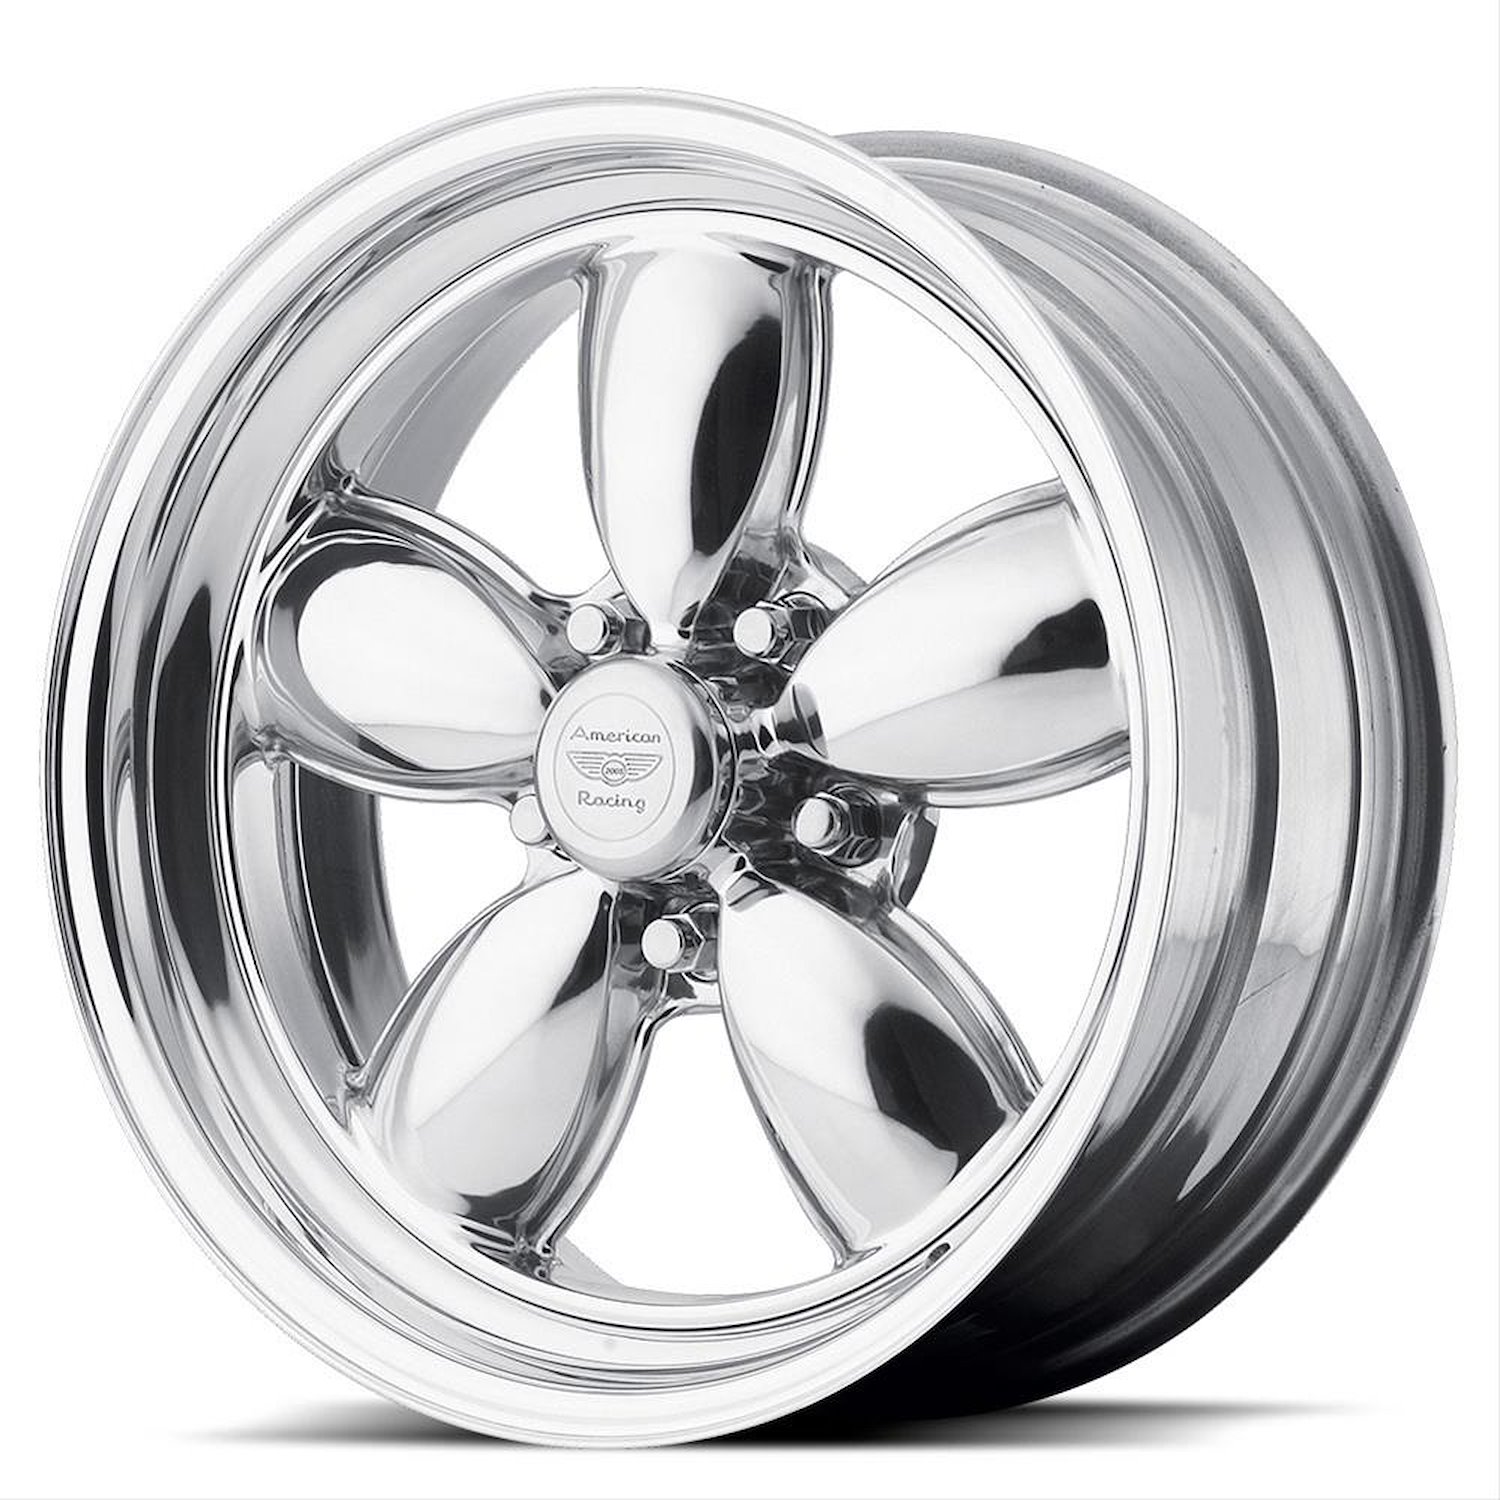 AMERICAN RACING CLASSIC 200S TWO-PIECE POLISHED 17 x 9.5 5x4.5 -6 5.01